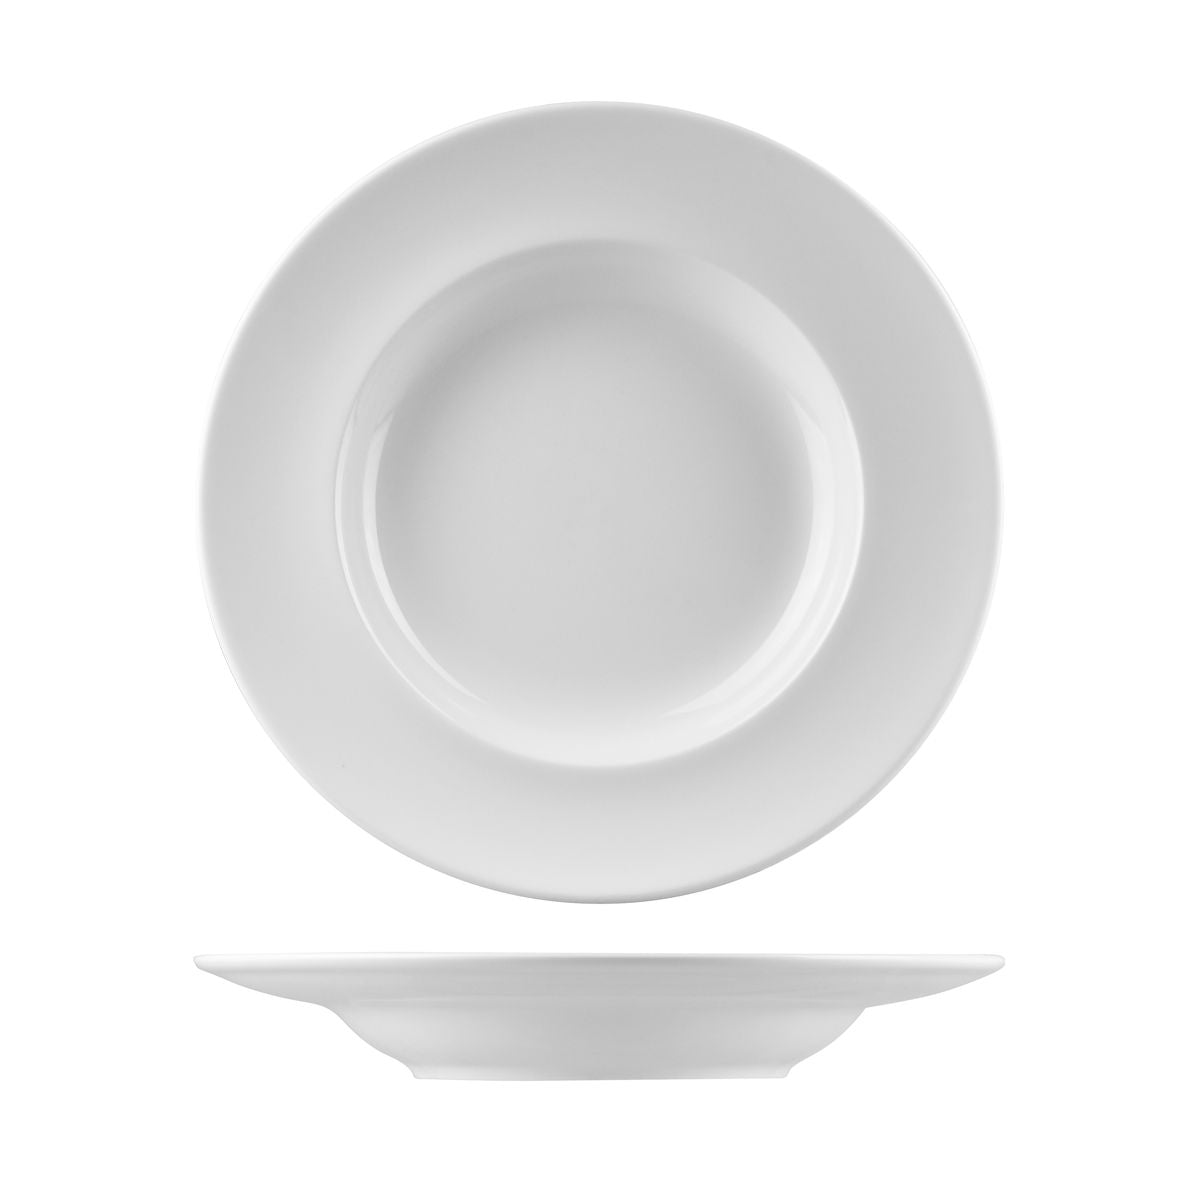 Deep Round Plate - 300Mm, Classic Gourmet from Rak Porcelain. made out of Porcelain and sold in boxes of 6. Hospitality quality at wholesale price with The Flying Fork! 